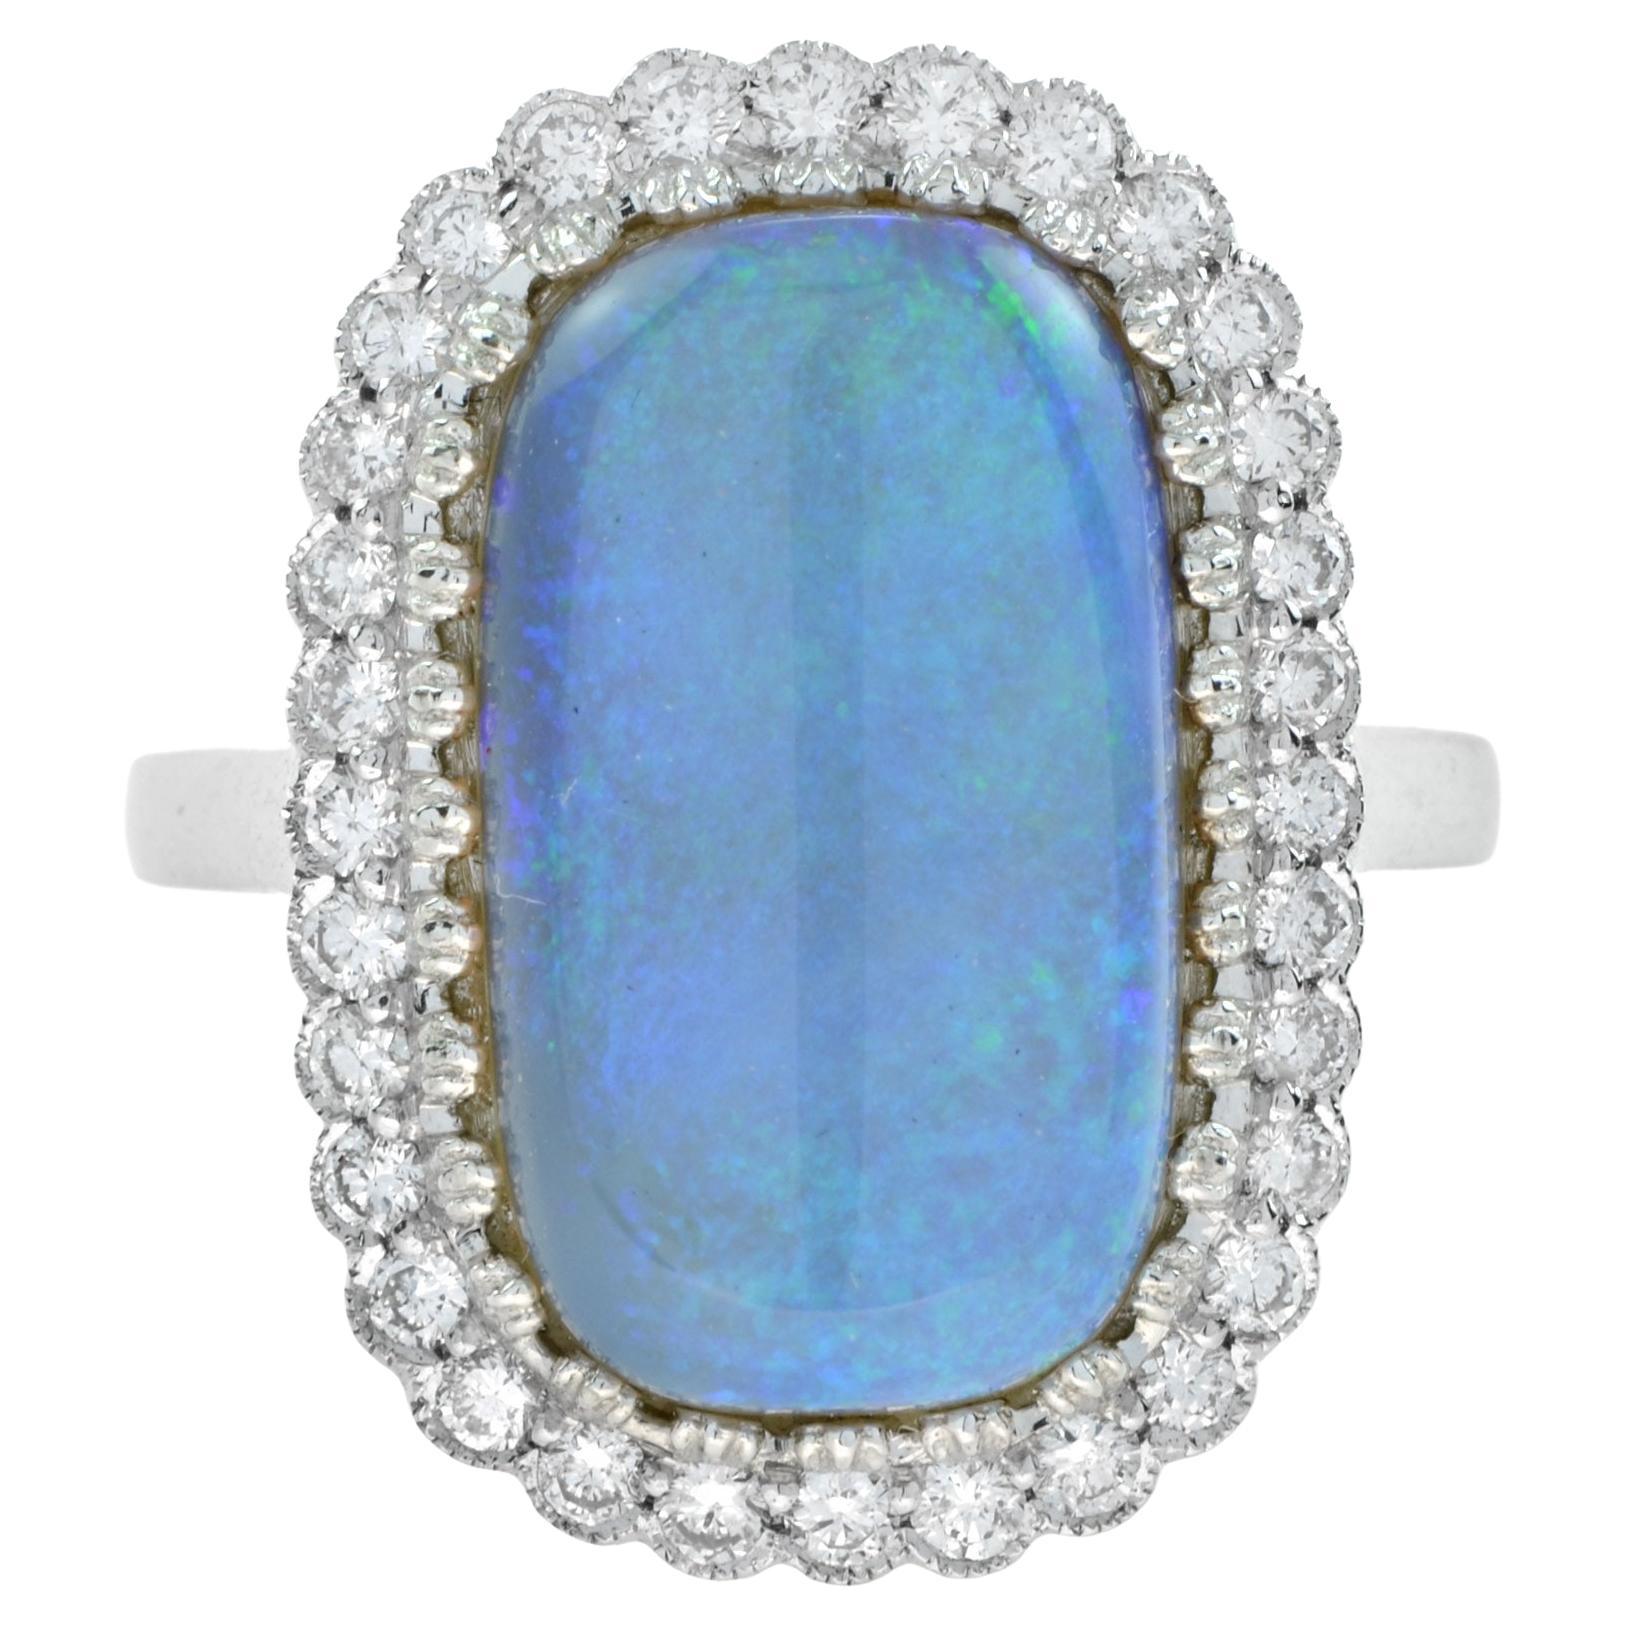 5.2 Ct. Crystal Australian Opal and Diamond Halo Ring in 18K White Gold For Sale